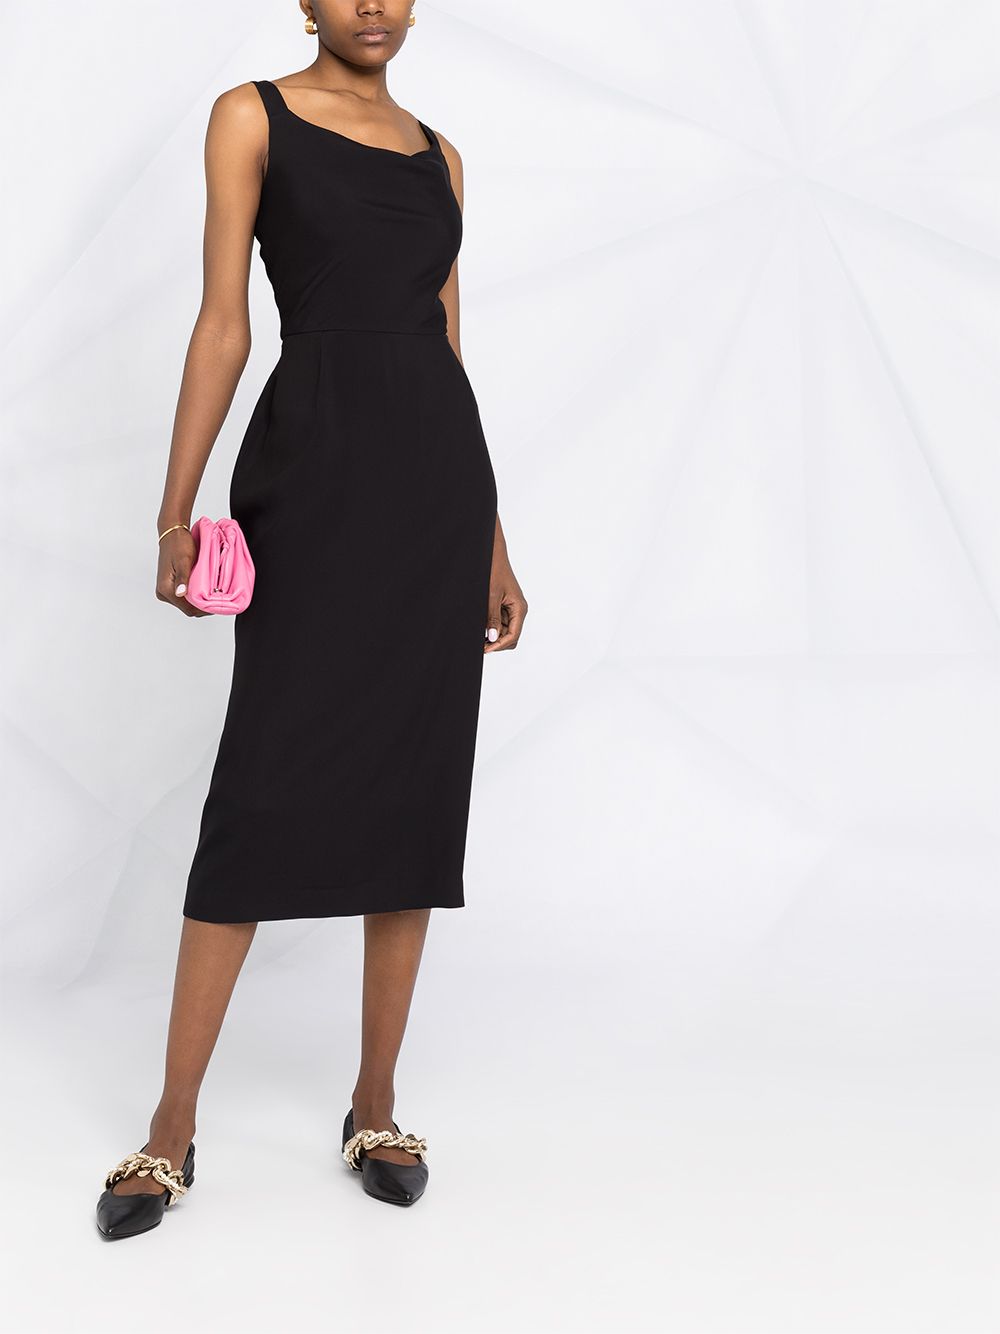 Shop Valentino Cady Evolution shift dress with Express Delivery - FARFETCH